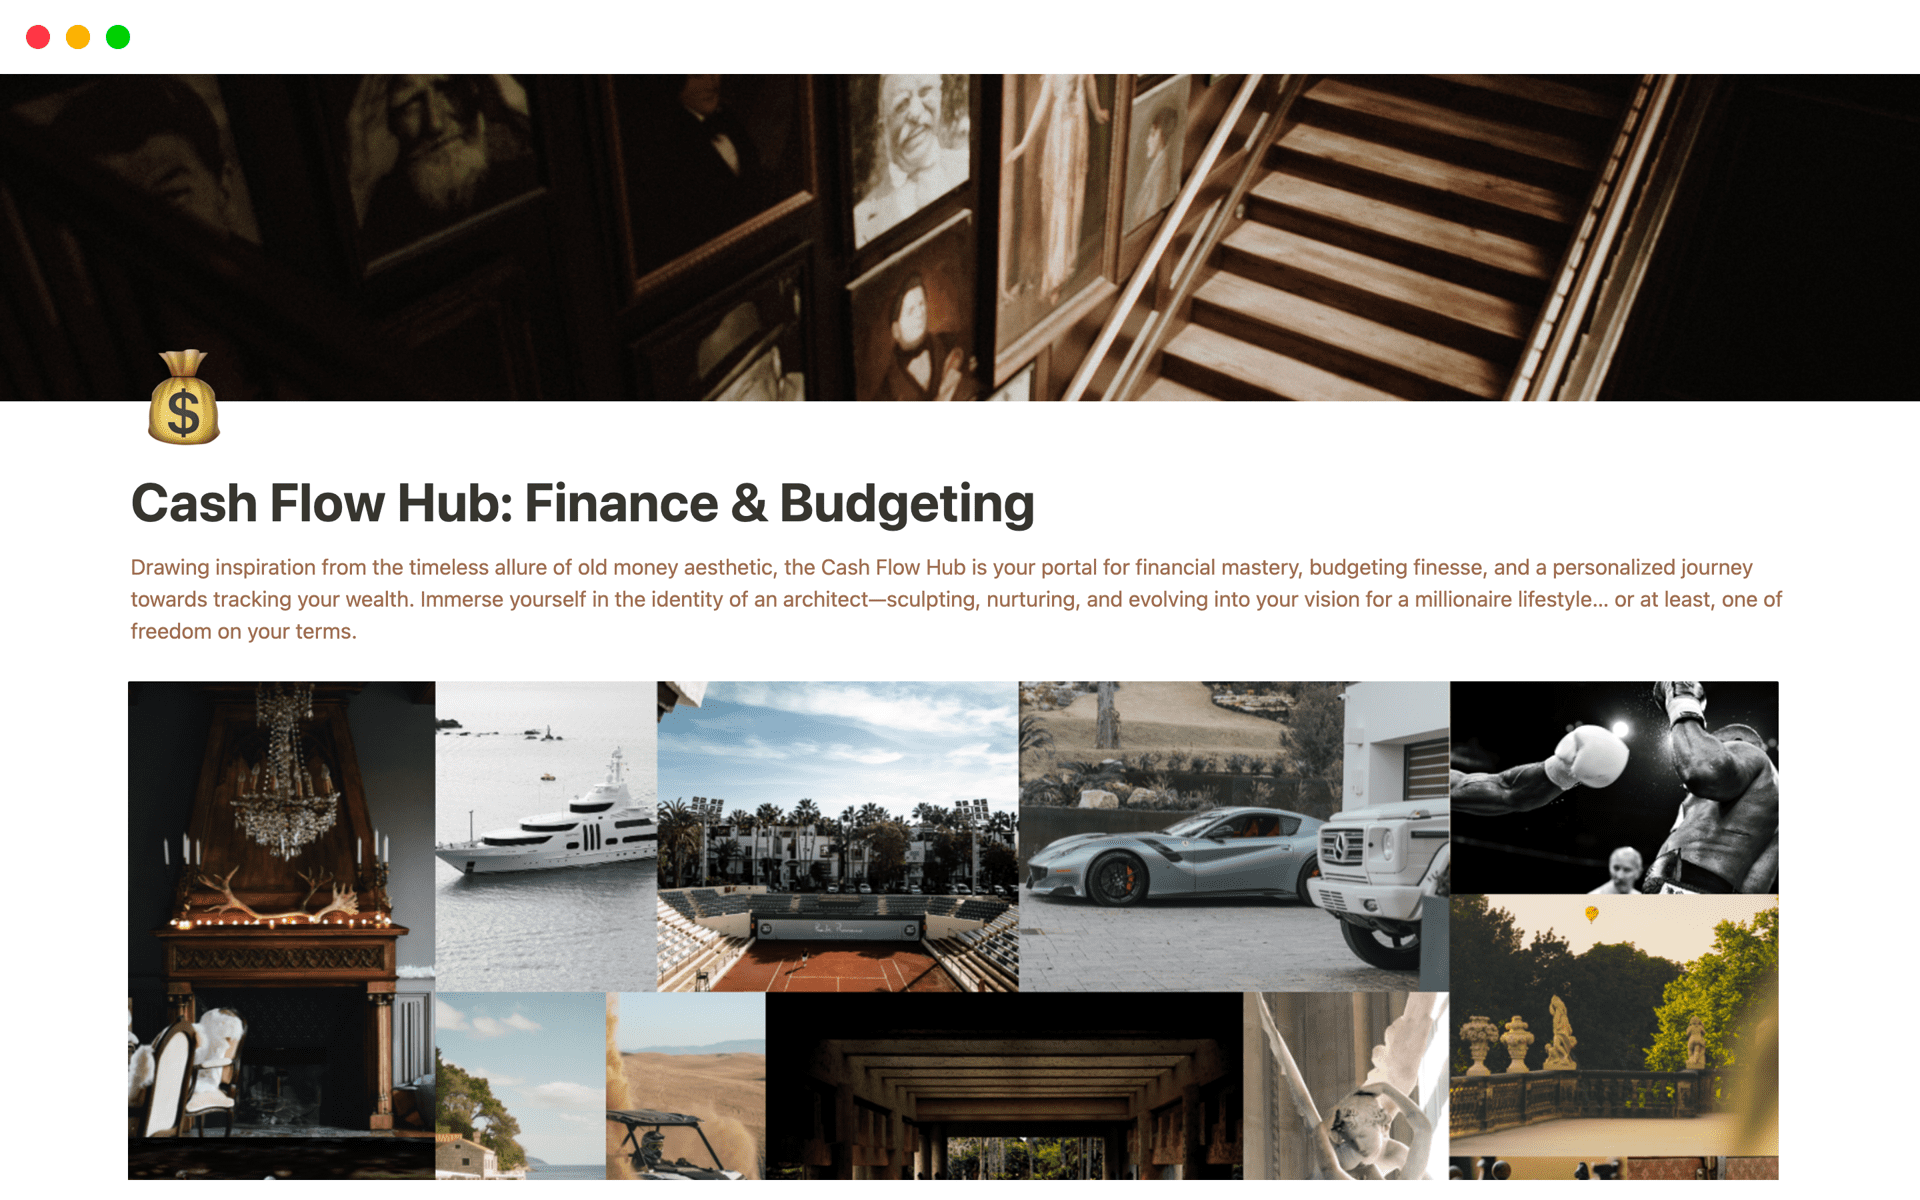 The Cash Flow Hub, inspired by old money aesthetic, offers a Notion template for financial mastery, offering tools like an Account Overview, Income Snapshot, Expenses Snapshot, Streams of Income, and more in a Notion template for tracking wealth and lifestyle goals.